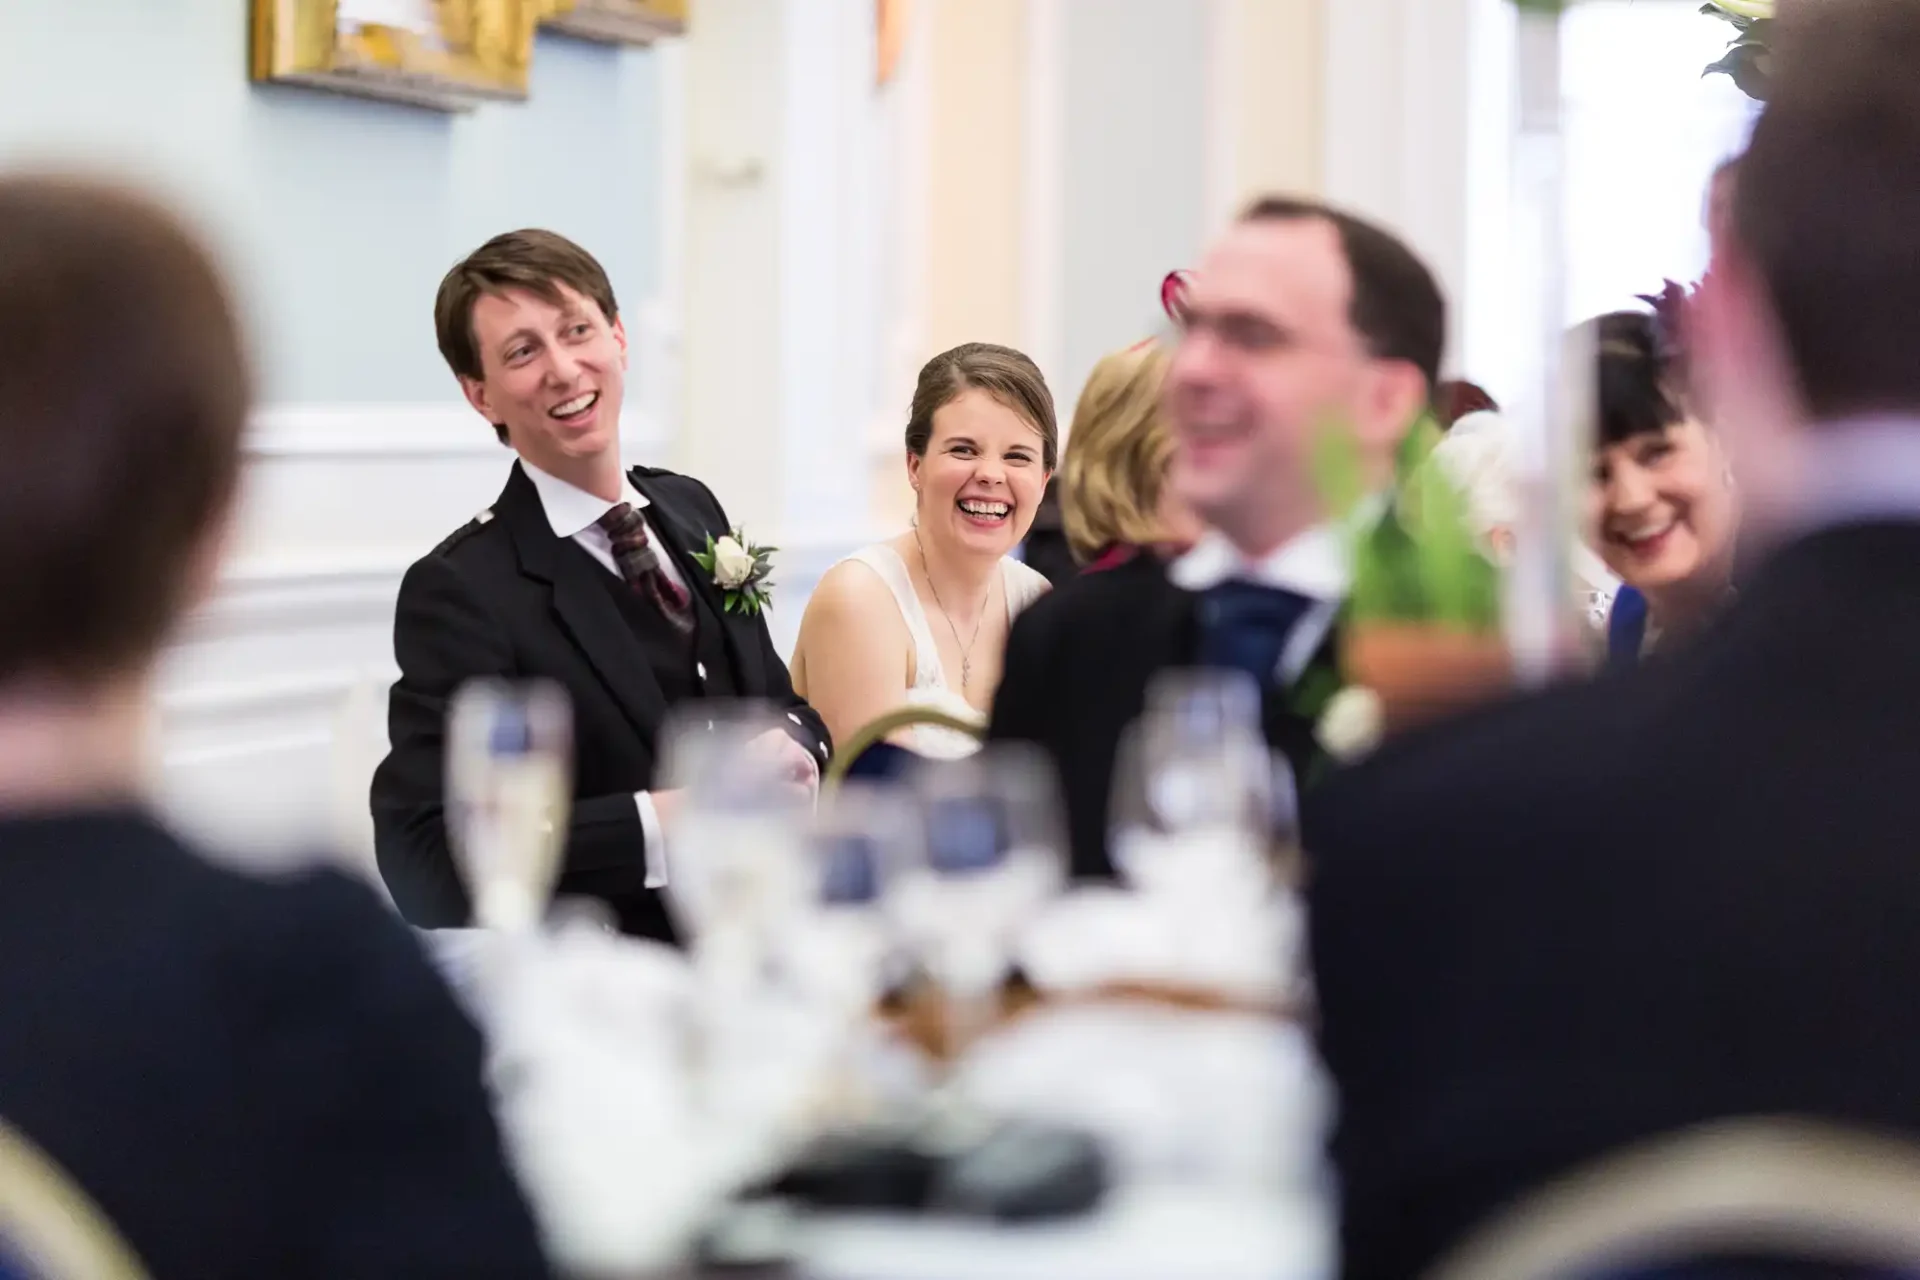 A bride and groom laugh joyously at a wedding reception table surrounded by guests in a well-lit room.